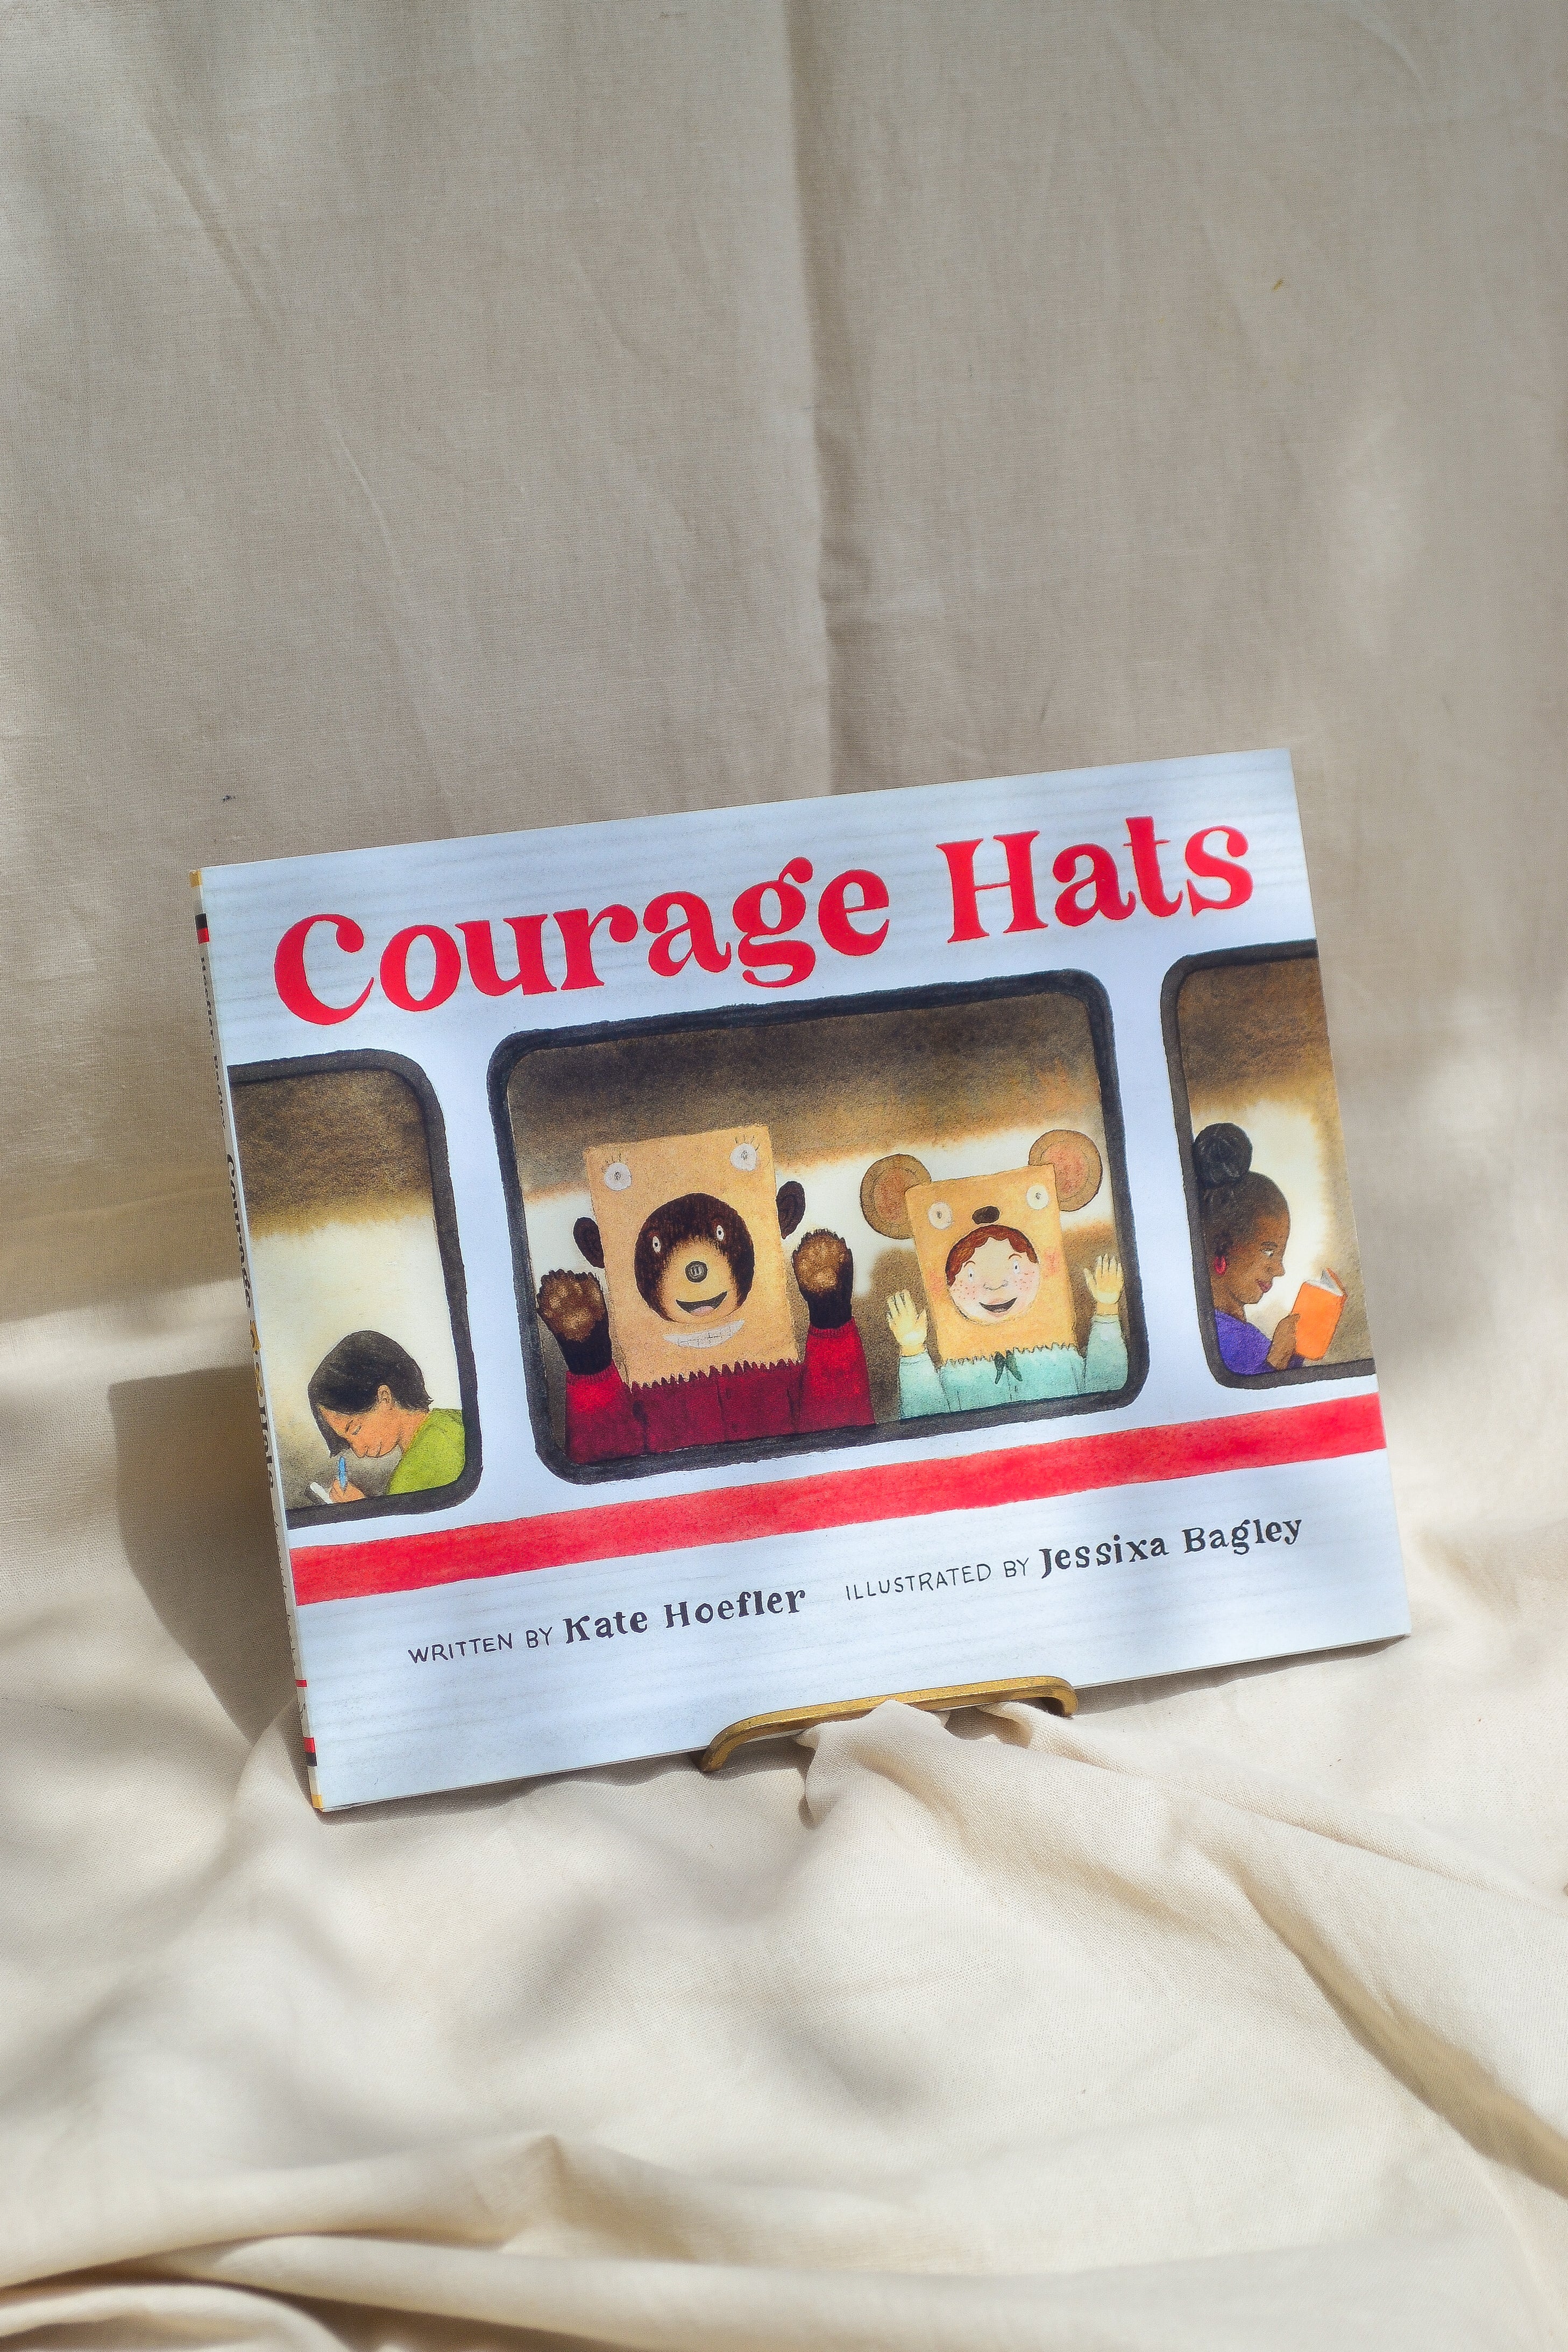 Courage Hats by Kate Hoefler, a kids picture book sold at Thread Spun